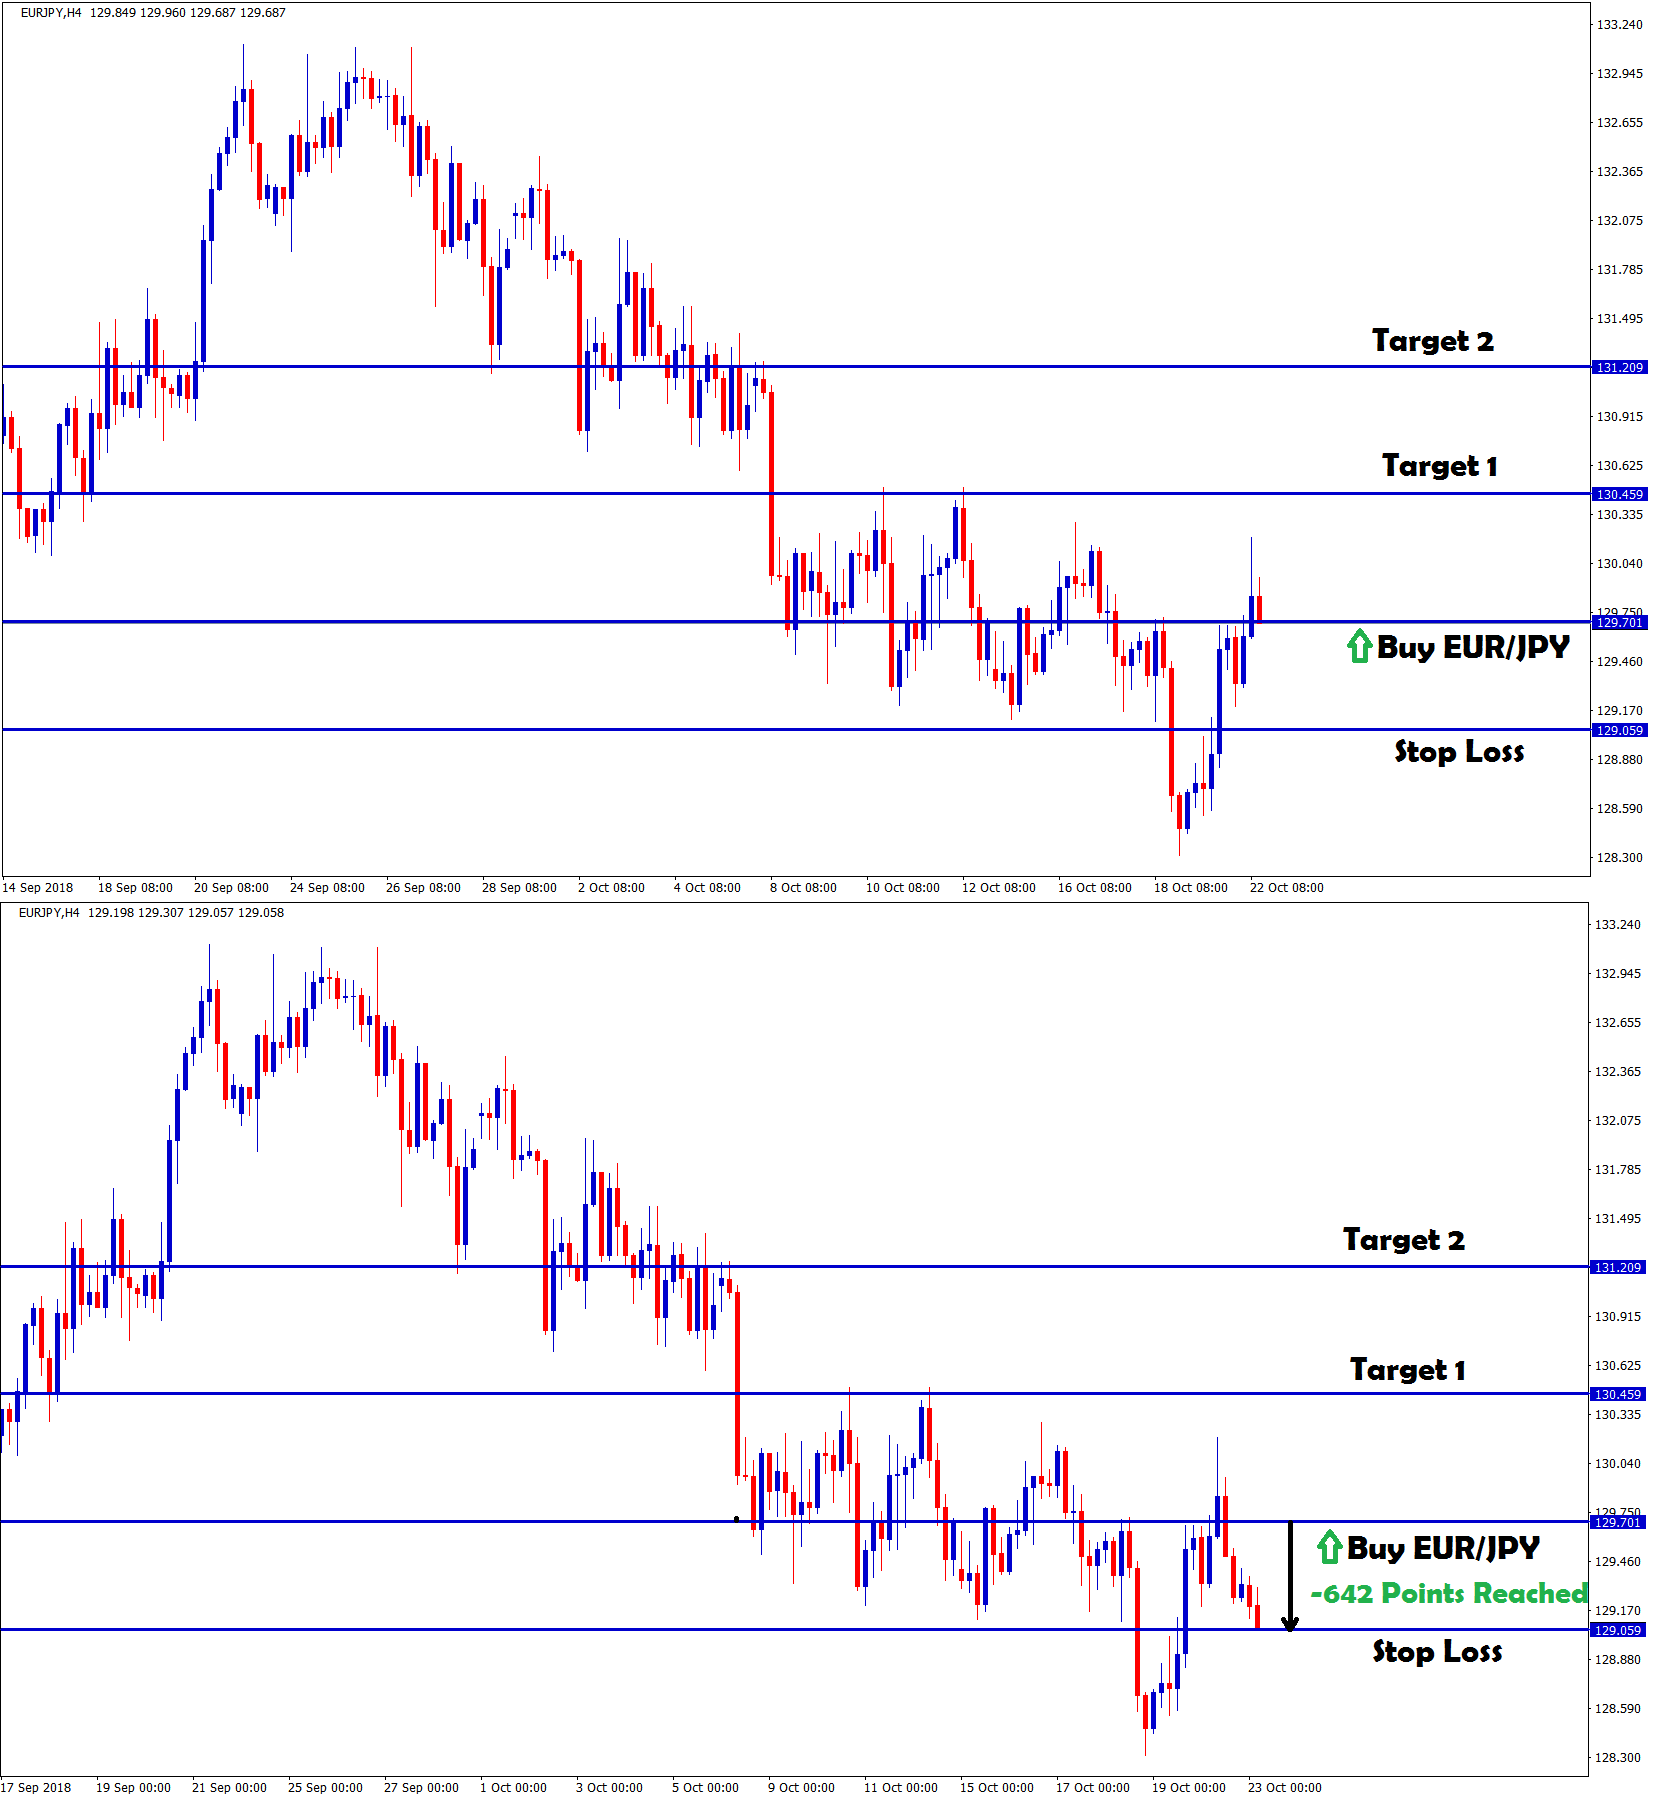 eurjpy reached the stop loss with -642 points